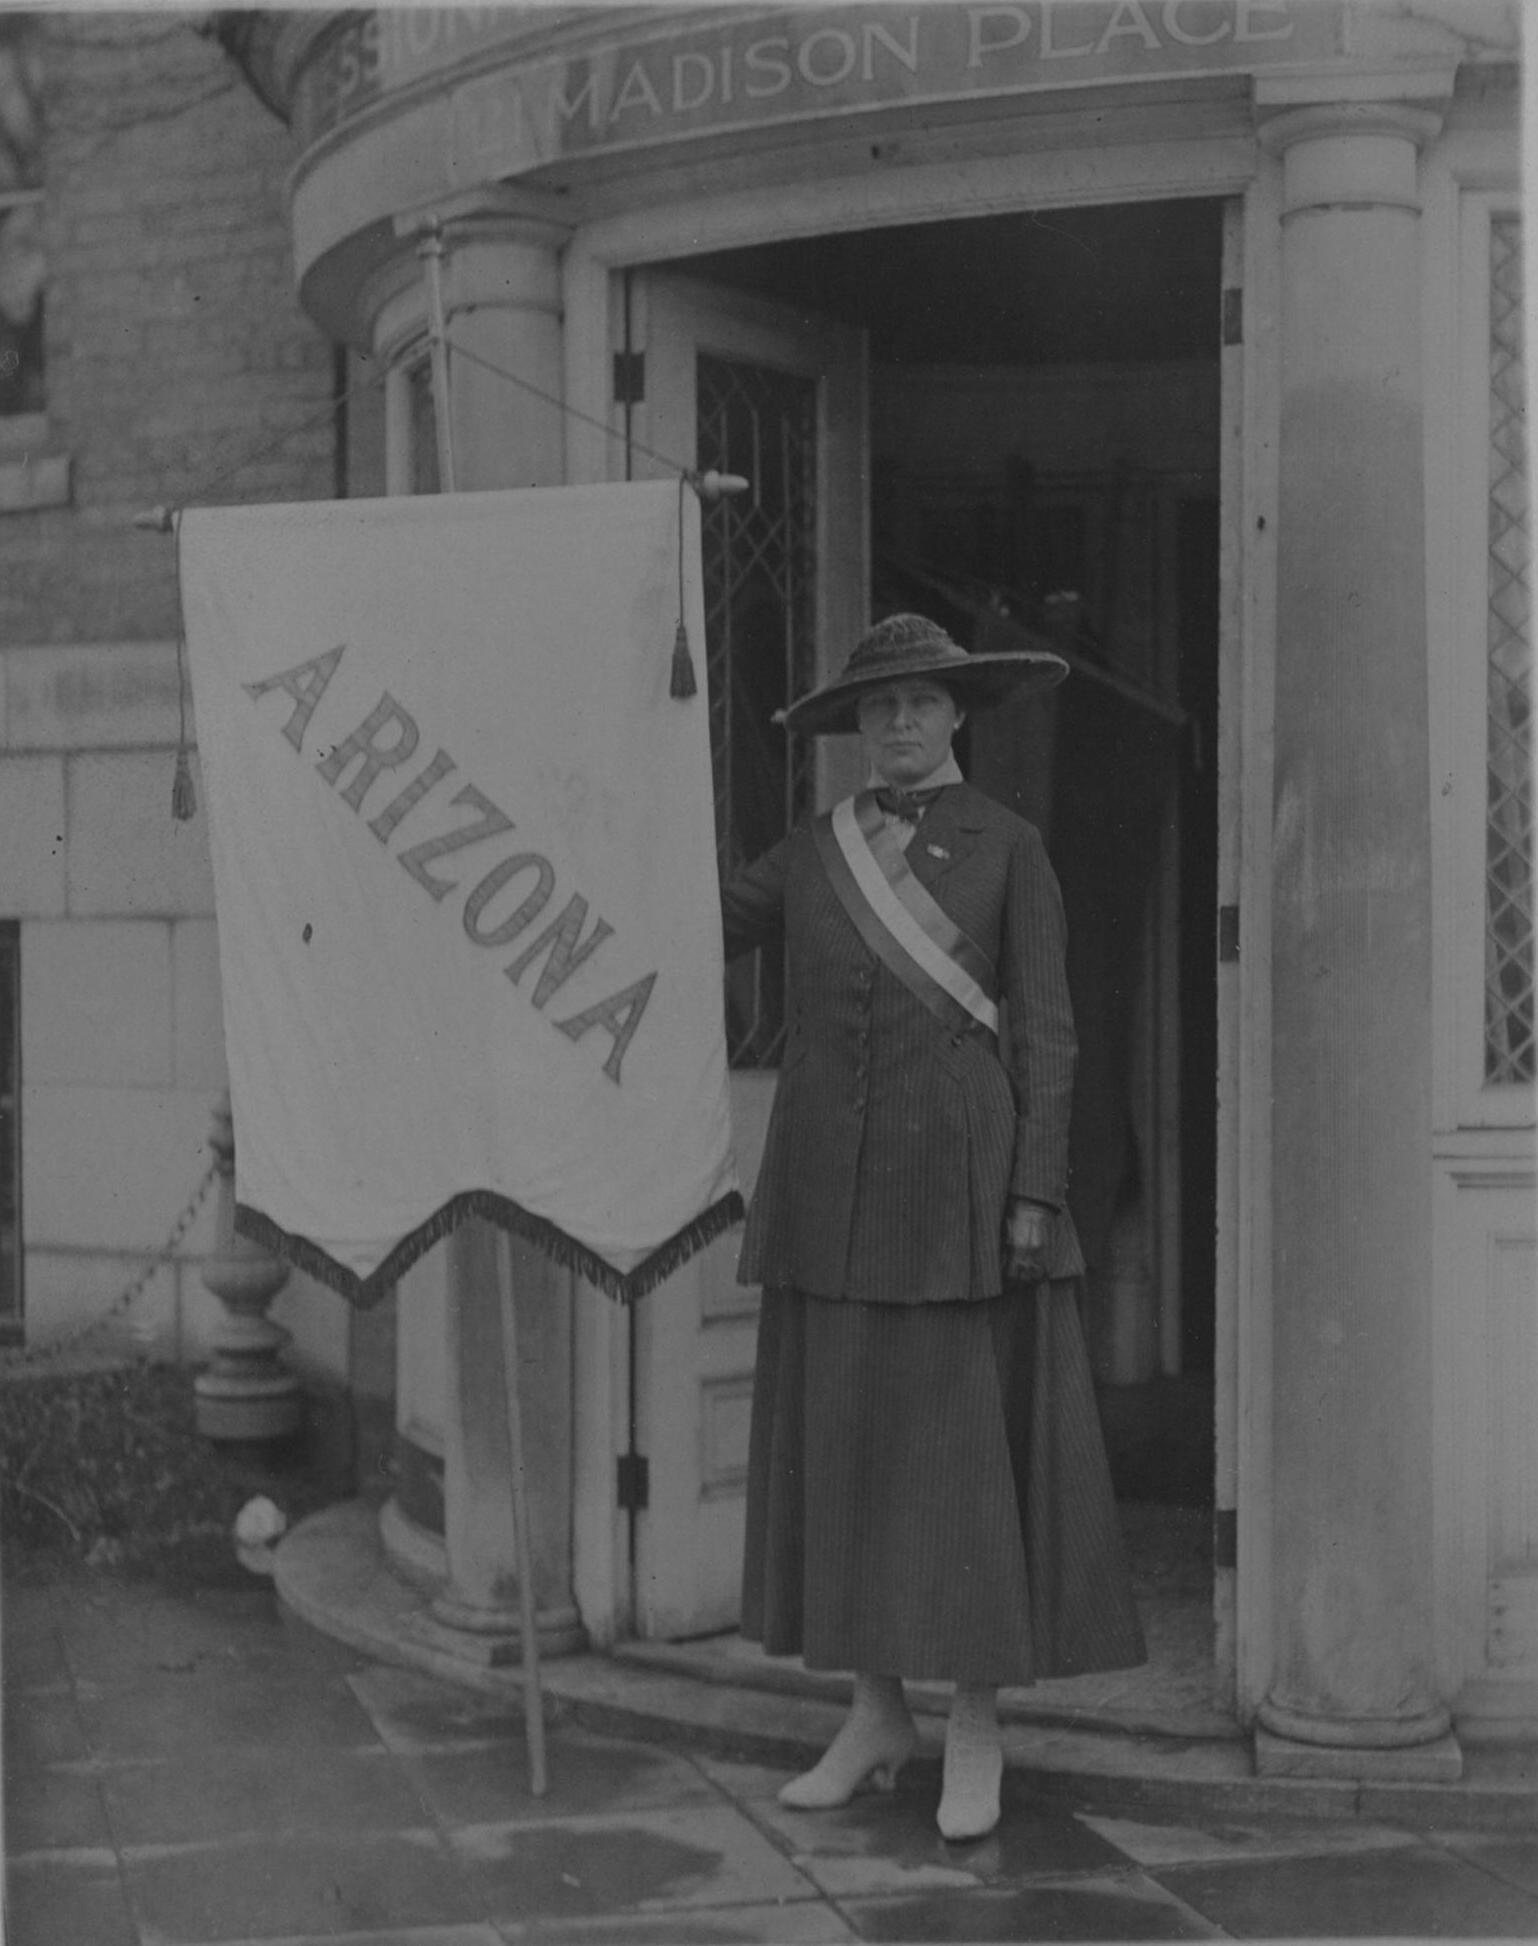 Women's Suffrage in the U.S.: Photos - The Atlantic